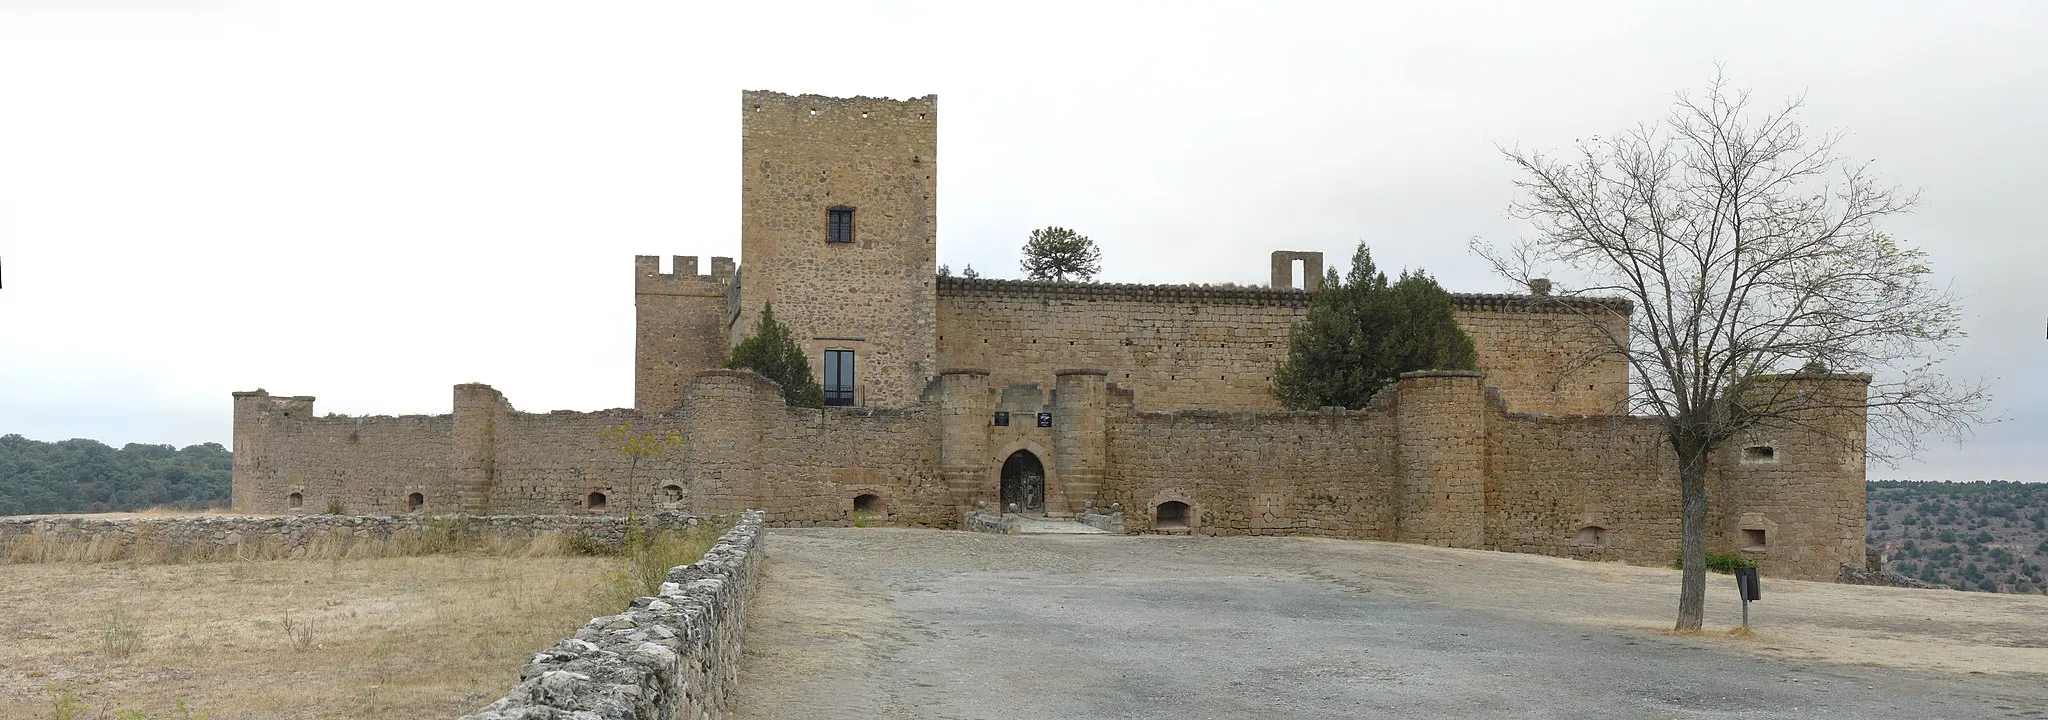 Photo showing: View of the castle at Pedraza, Segovia (Spain)